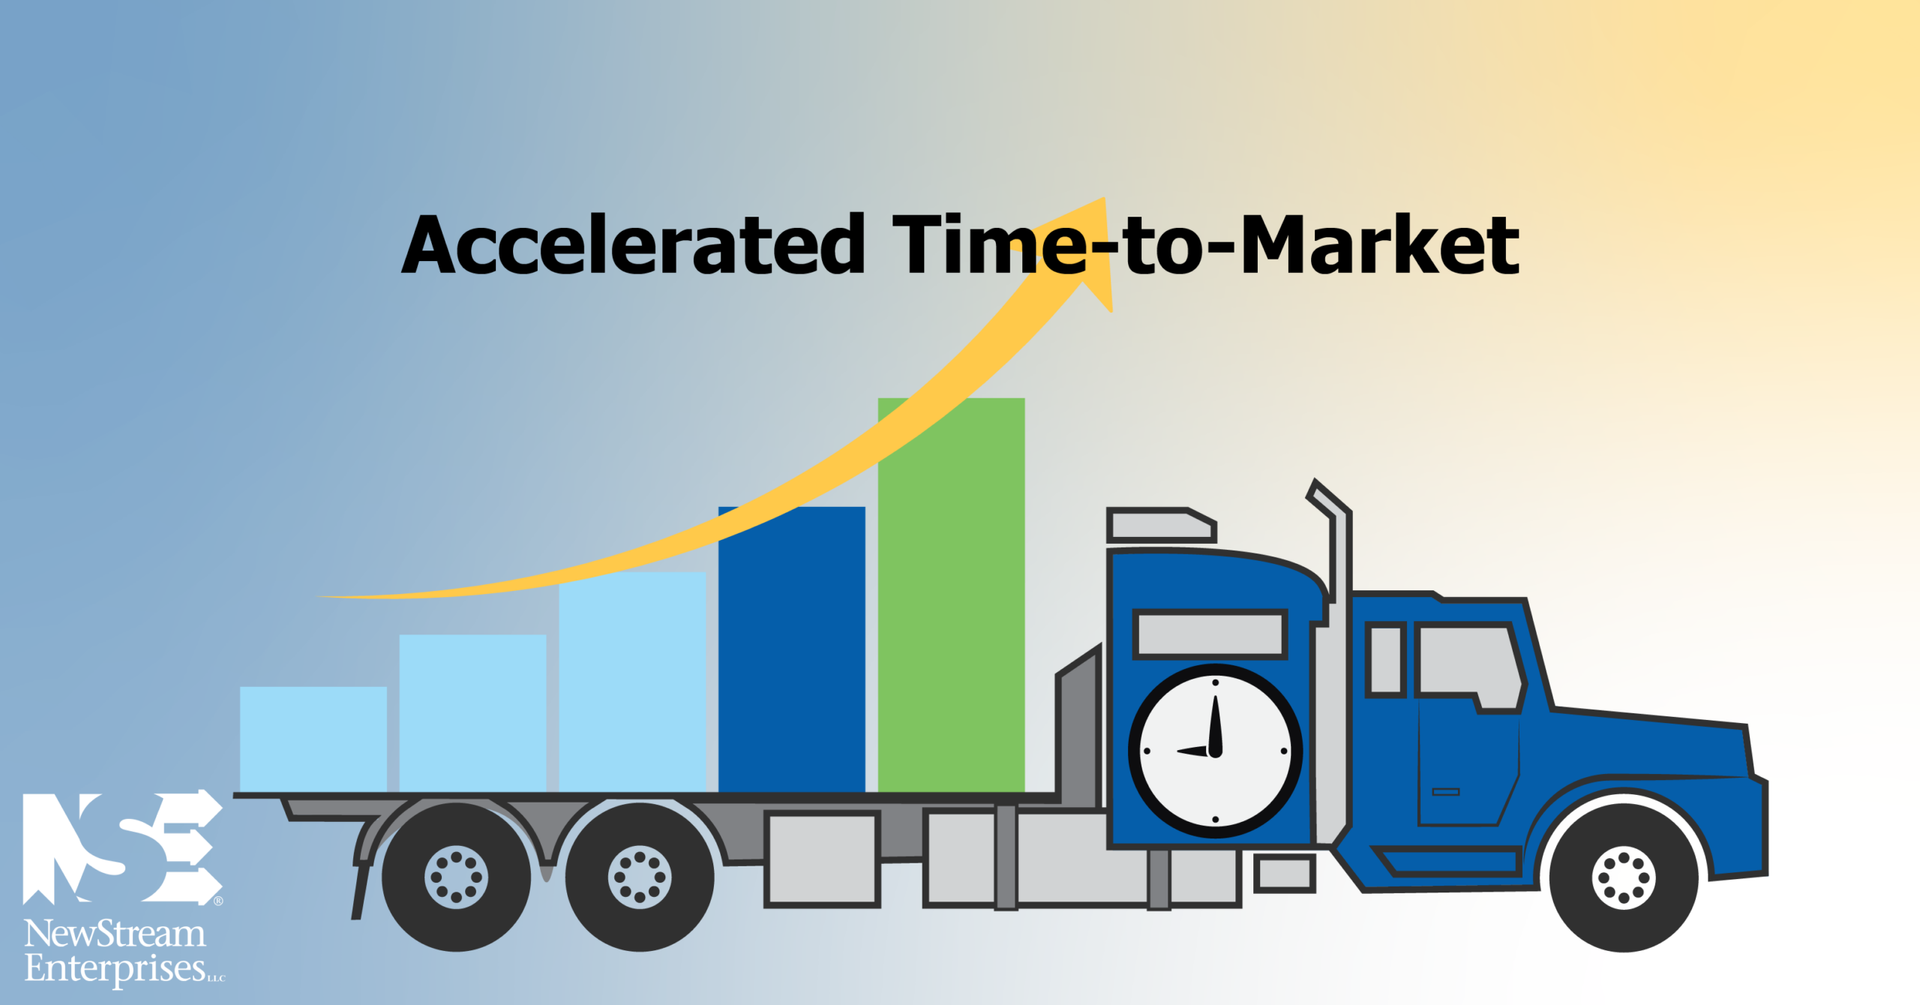 Accelerated Time-to-Market